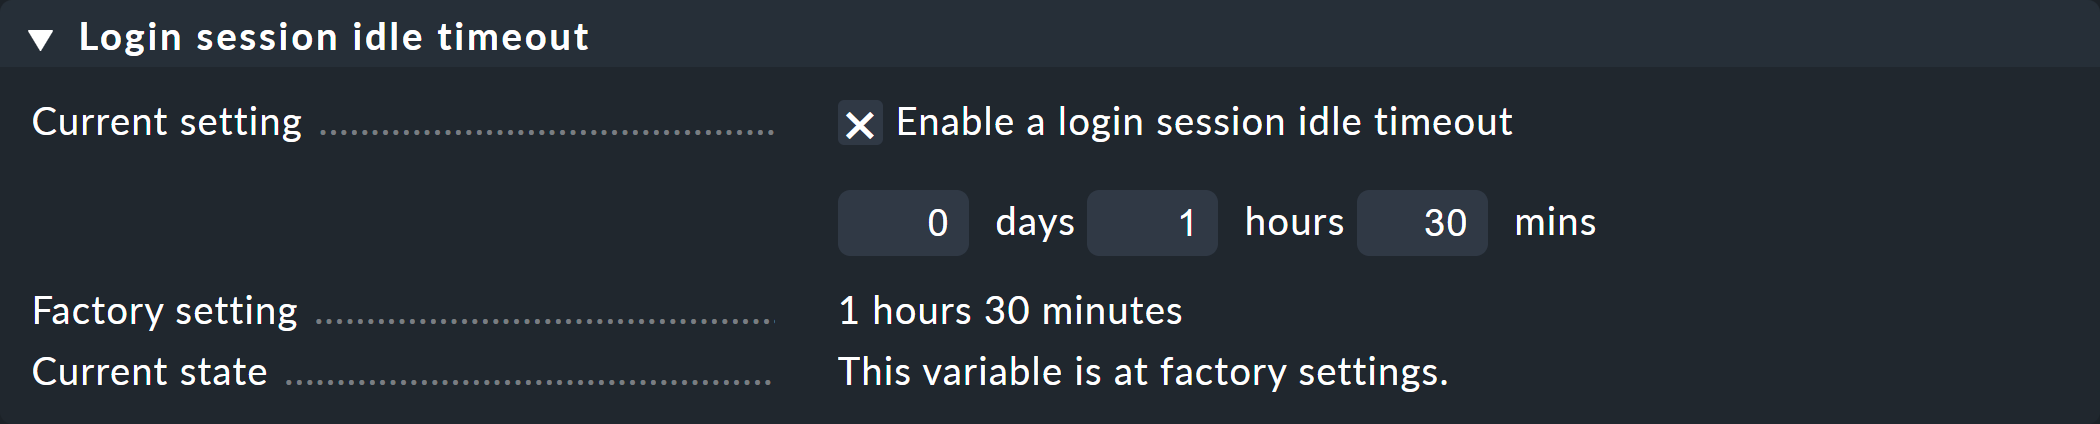 Dialog for login session timeouts.